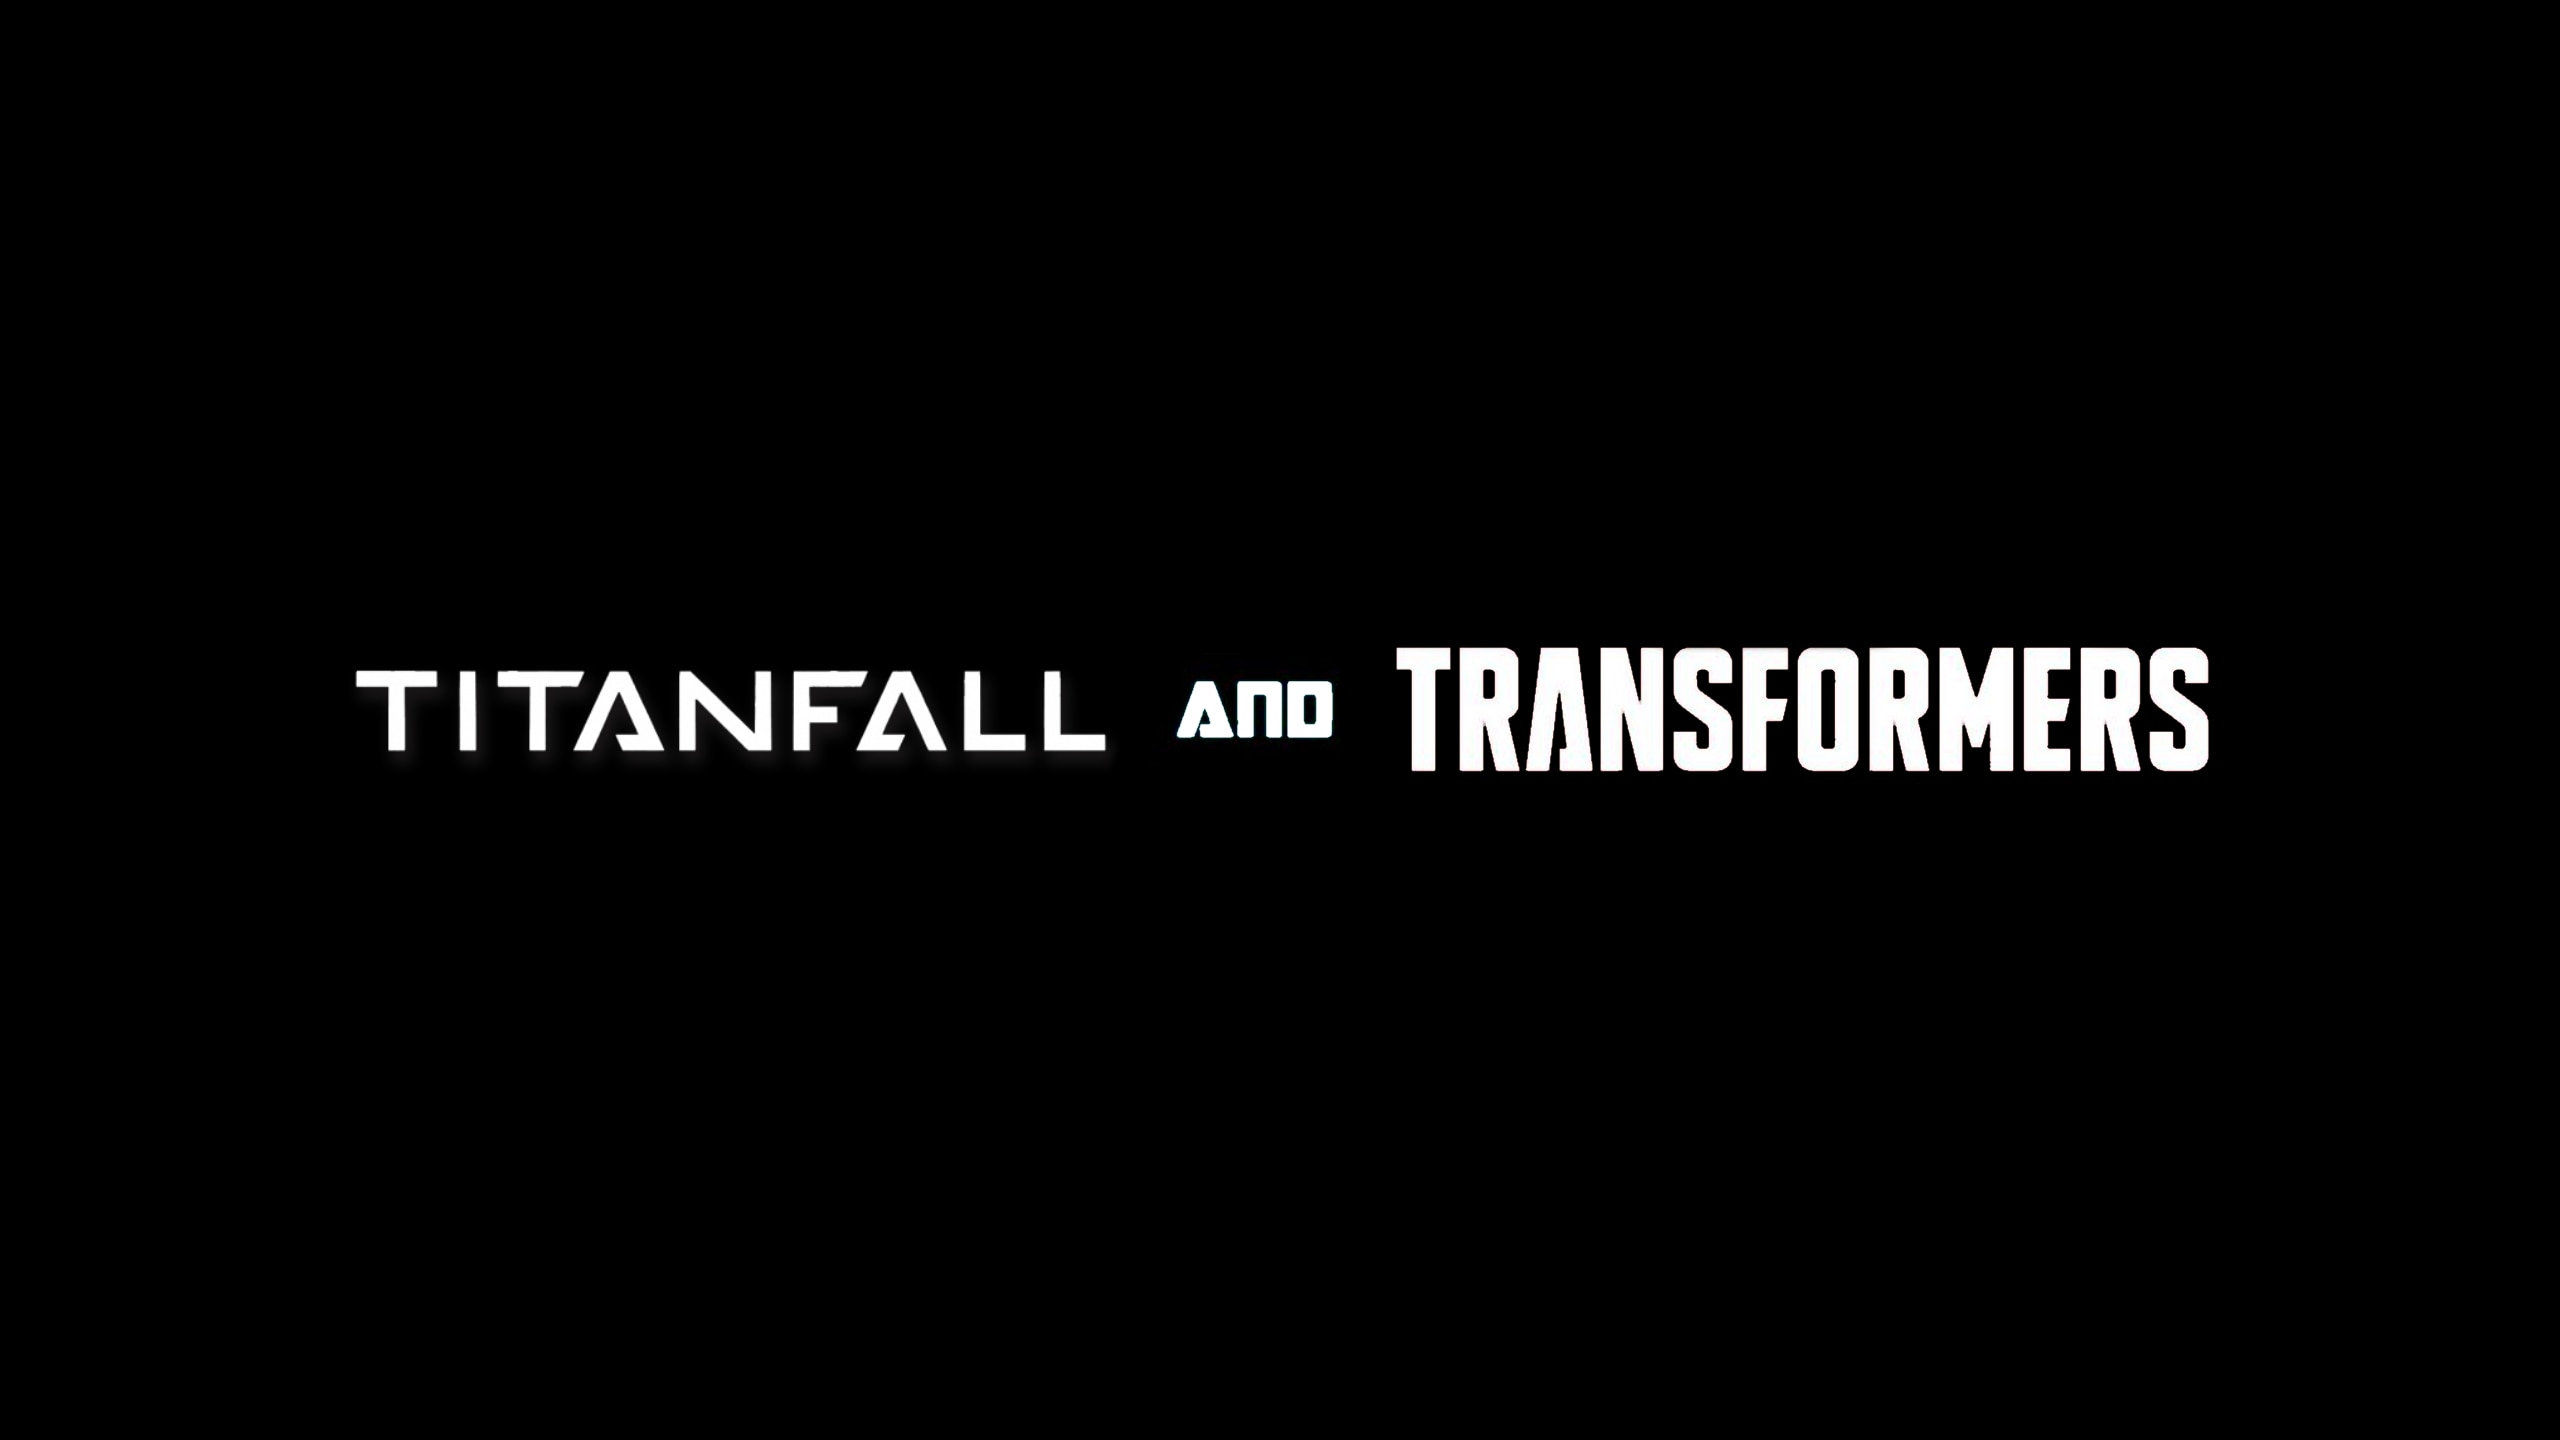 Rainbow Standby For Titanfall (Rainbow Six crossover) - Part 1